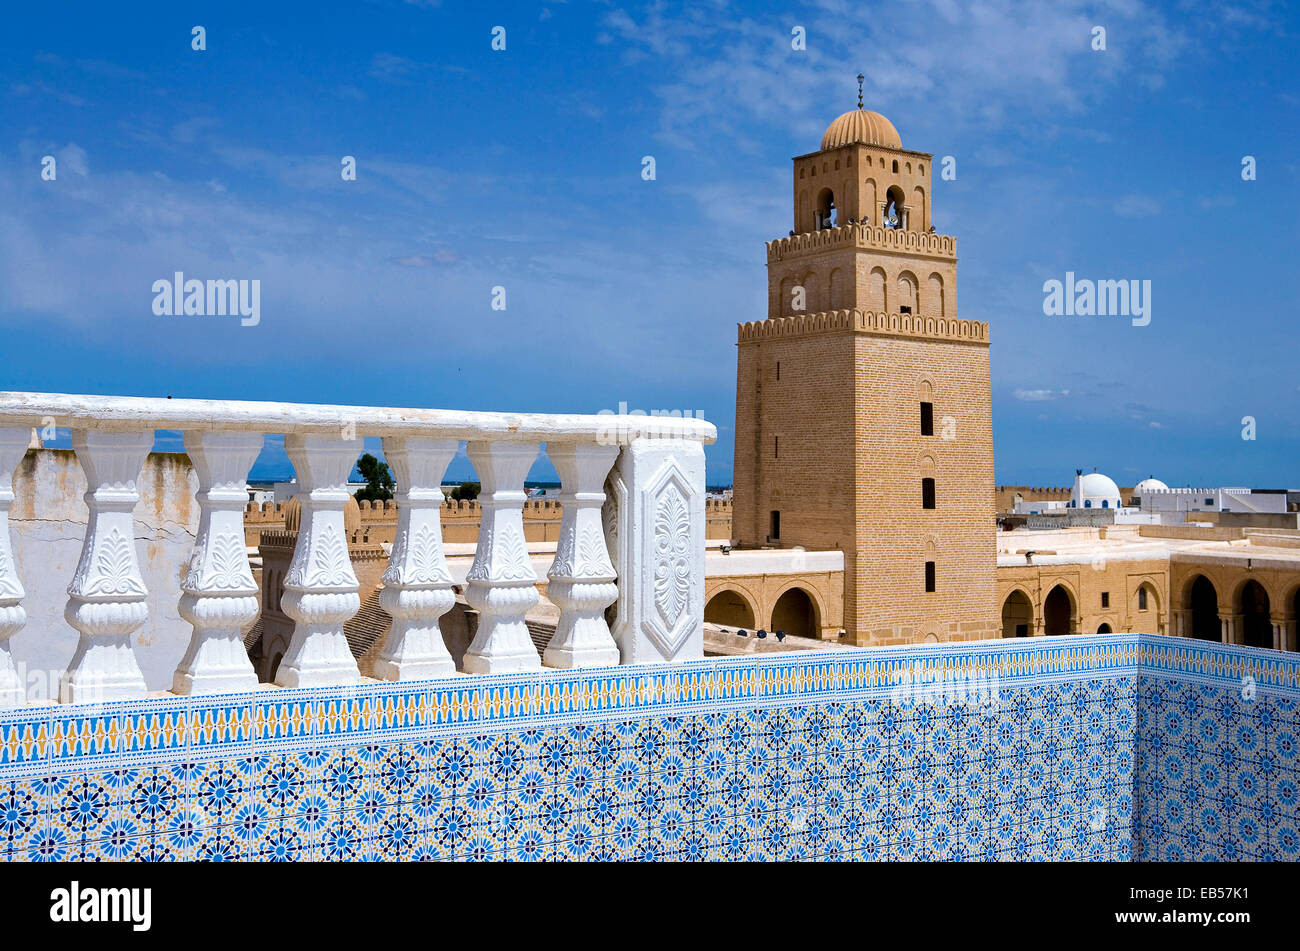 Tunisia, Kairouan, view of the Sidi Oqba mosque, olso known as the Grand Mosque, from a terrace of the Medina Stock Photo